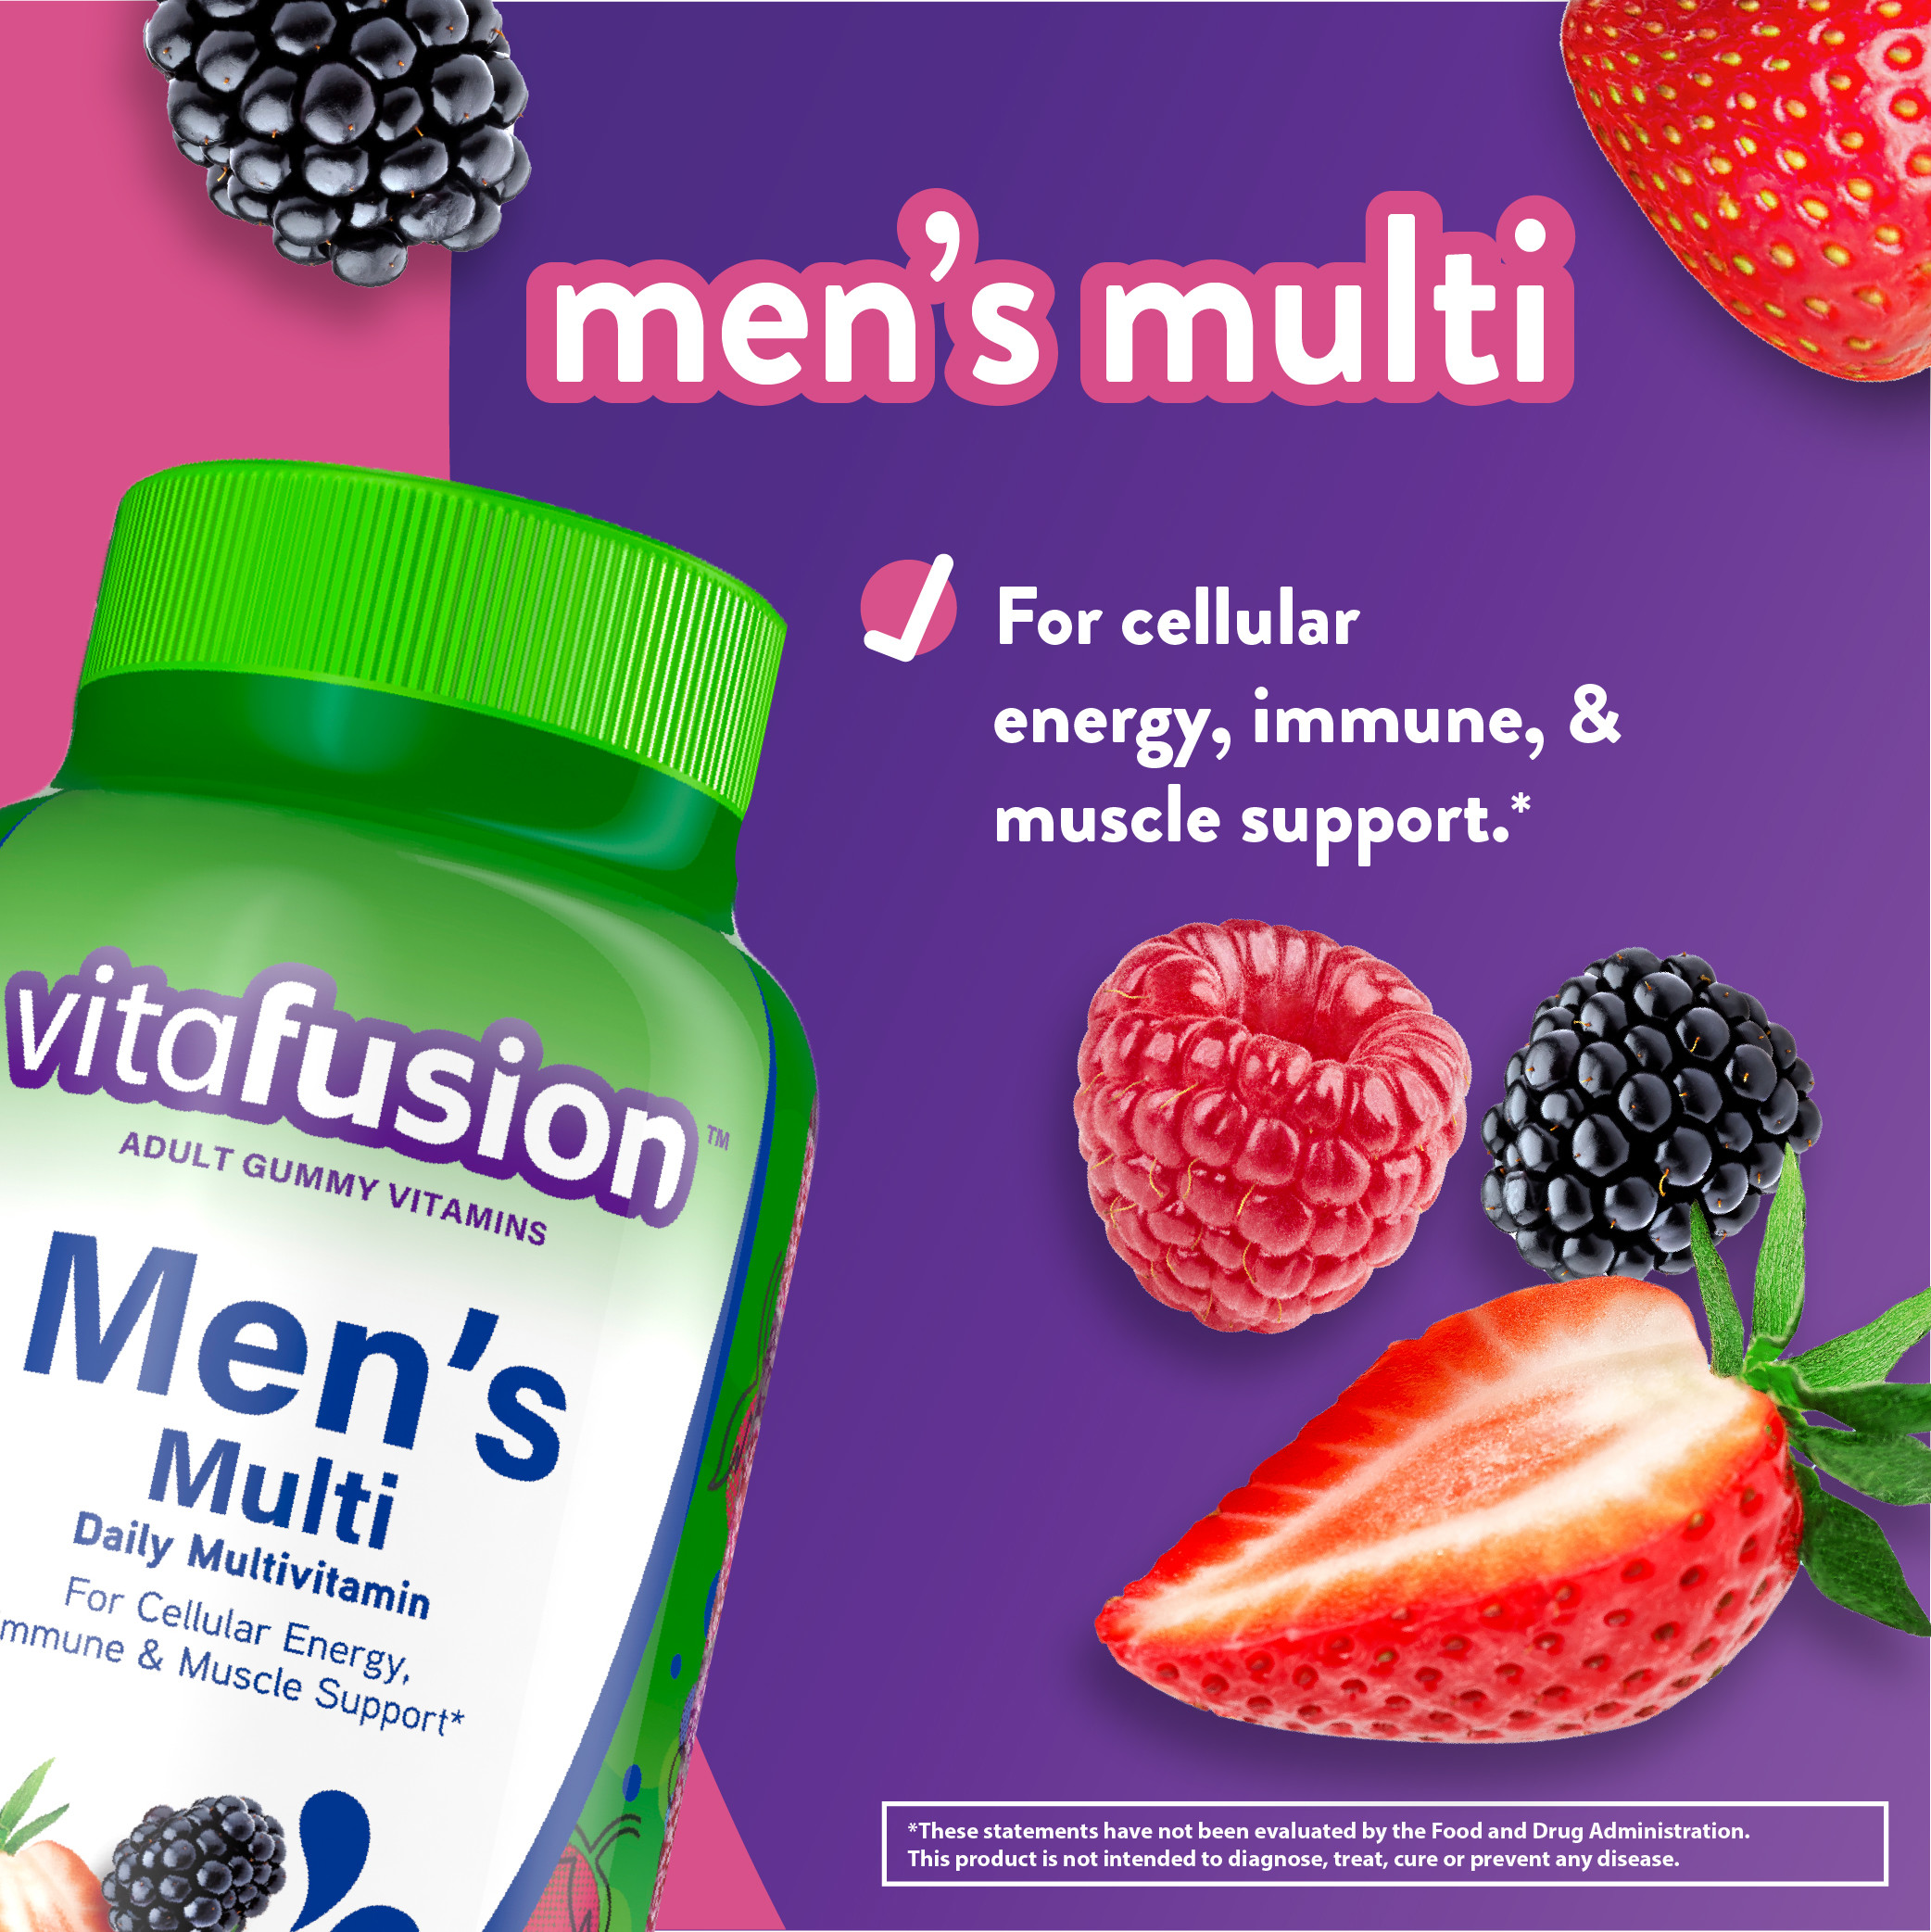 vitafusion Adult Gummy Vitamins for Men, Berry Flavored Daily Multivitamins for Men, 150 Count - image 4 of 10